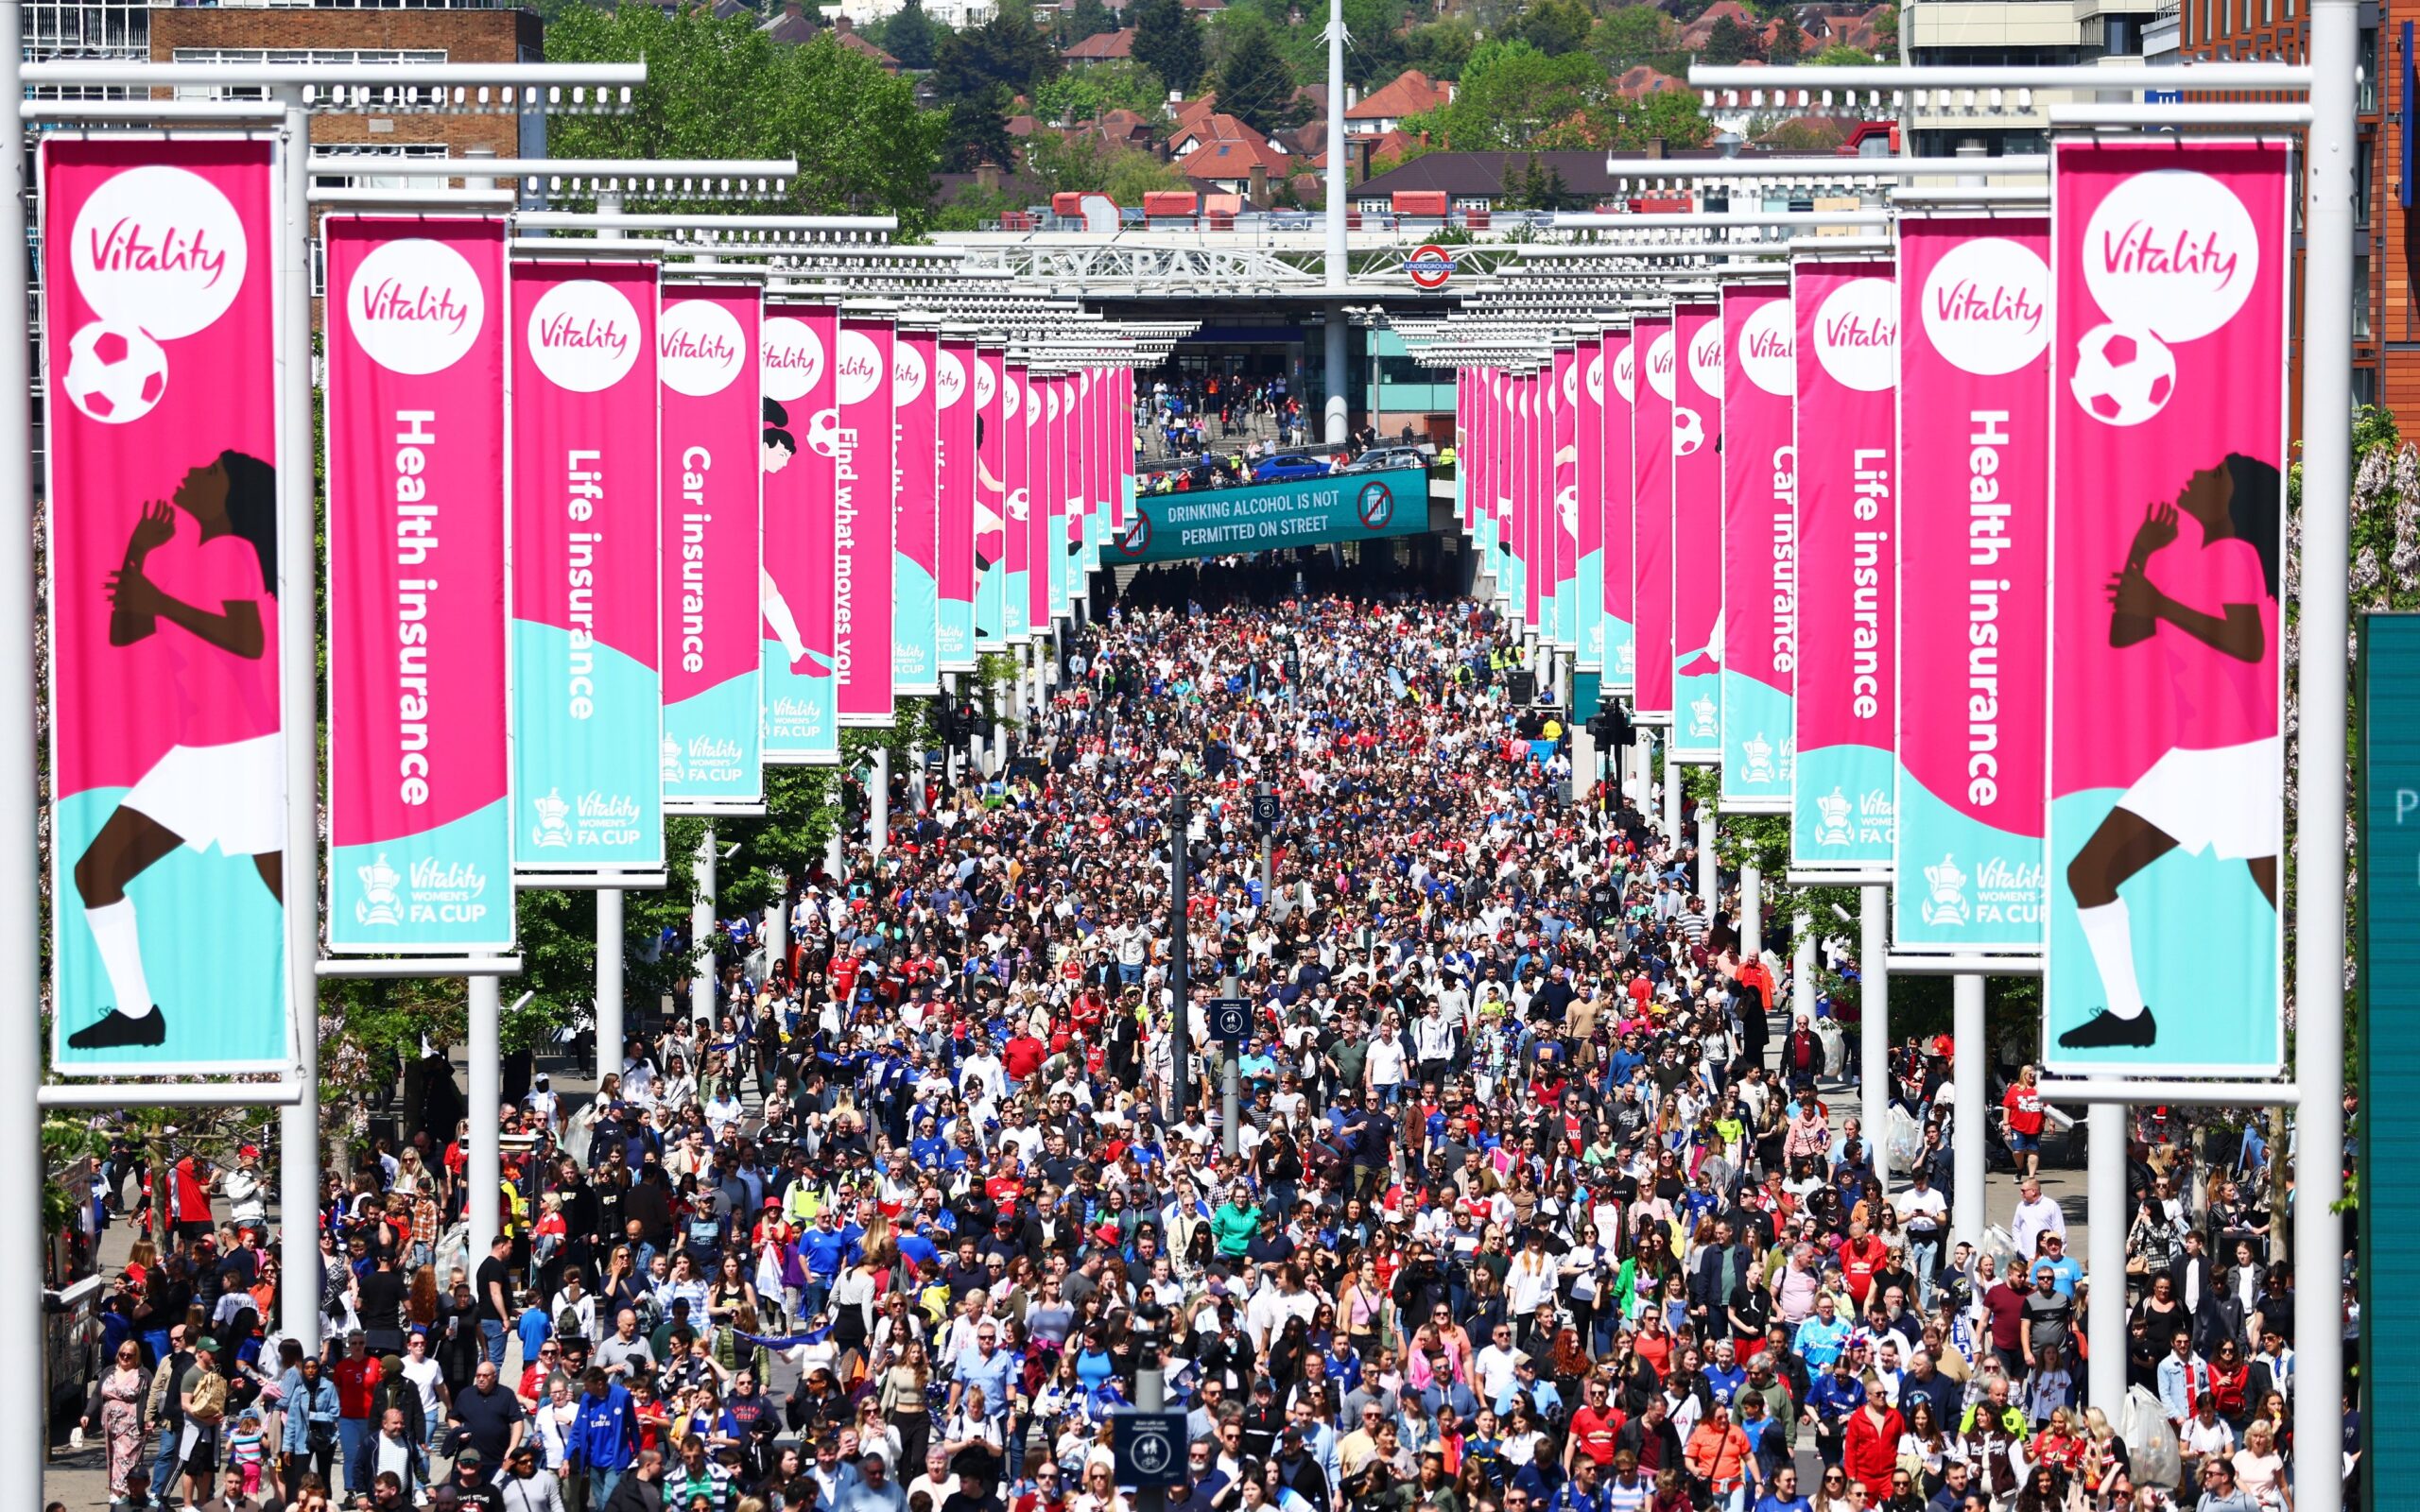 Women's FA Cup final sets world record attendance for women's domestic game